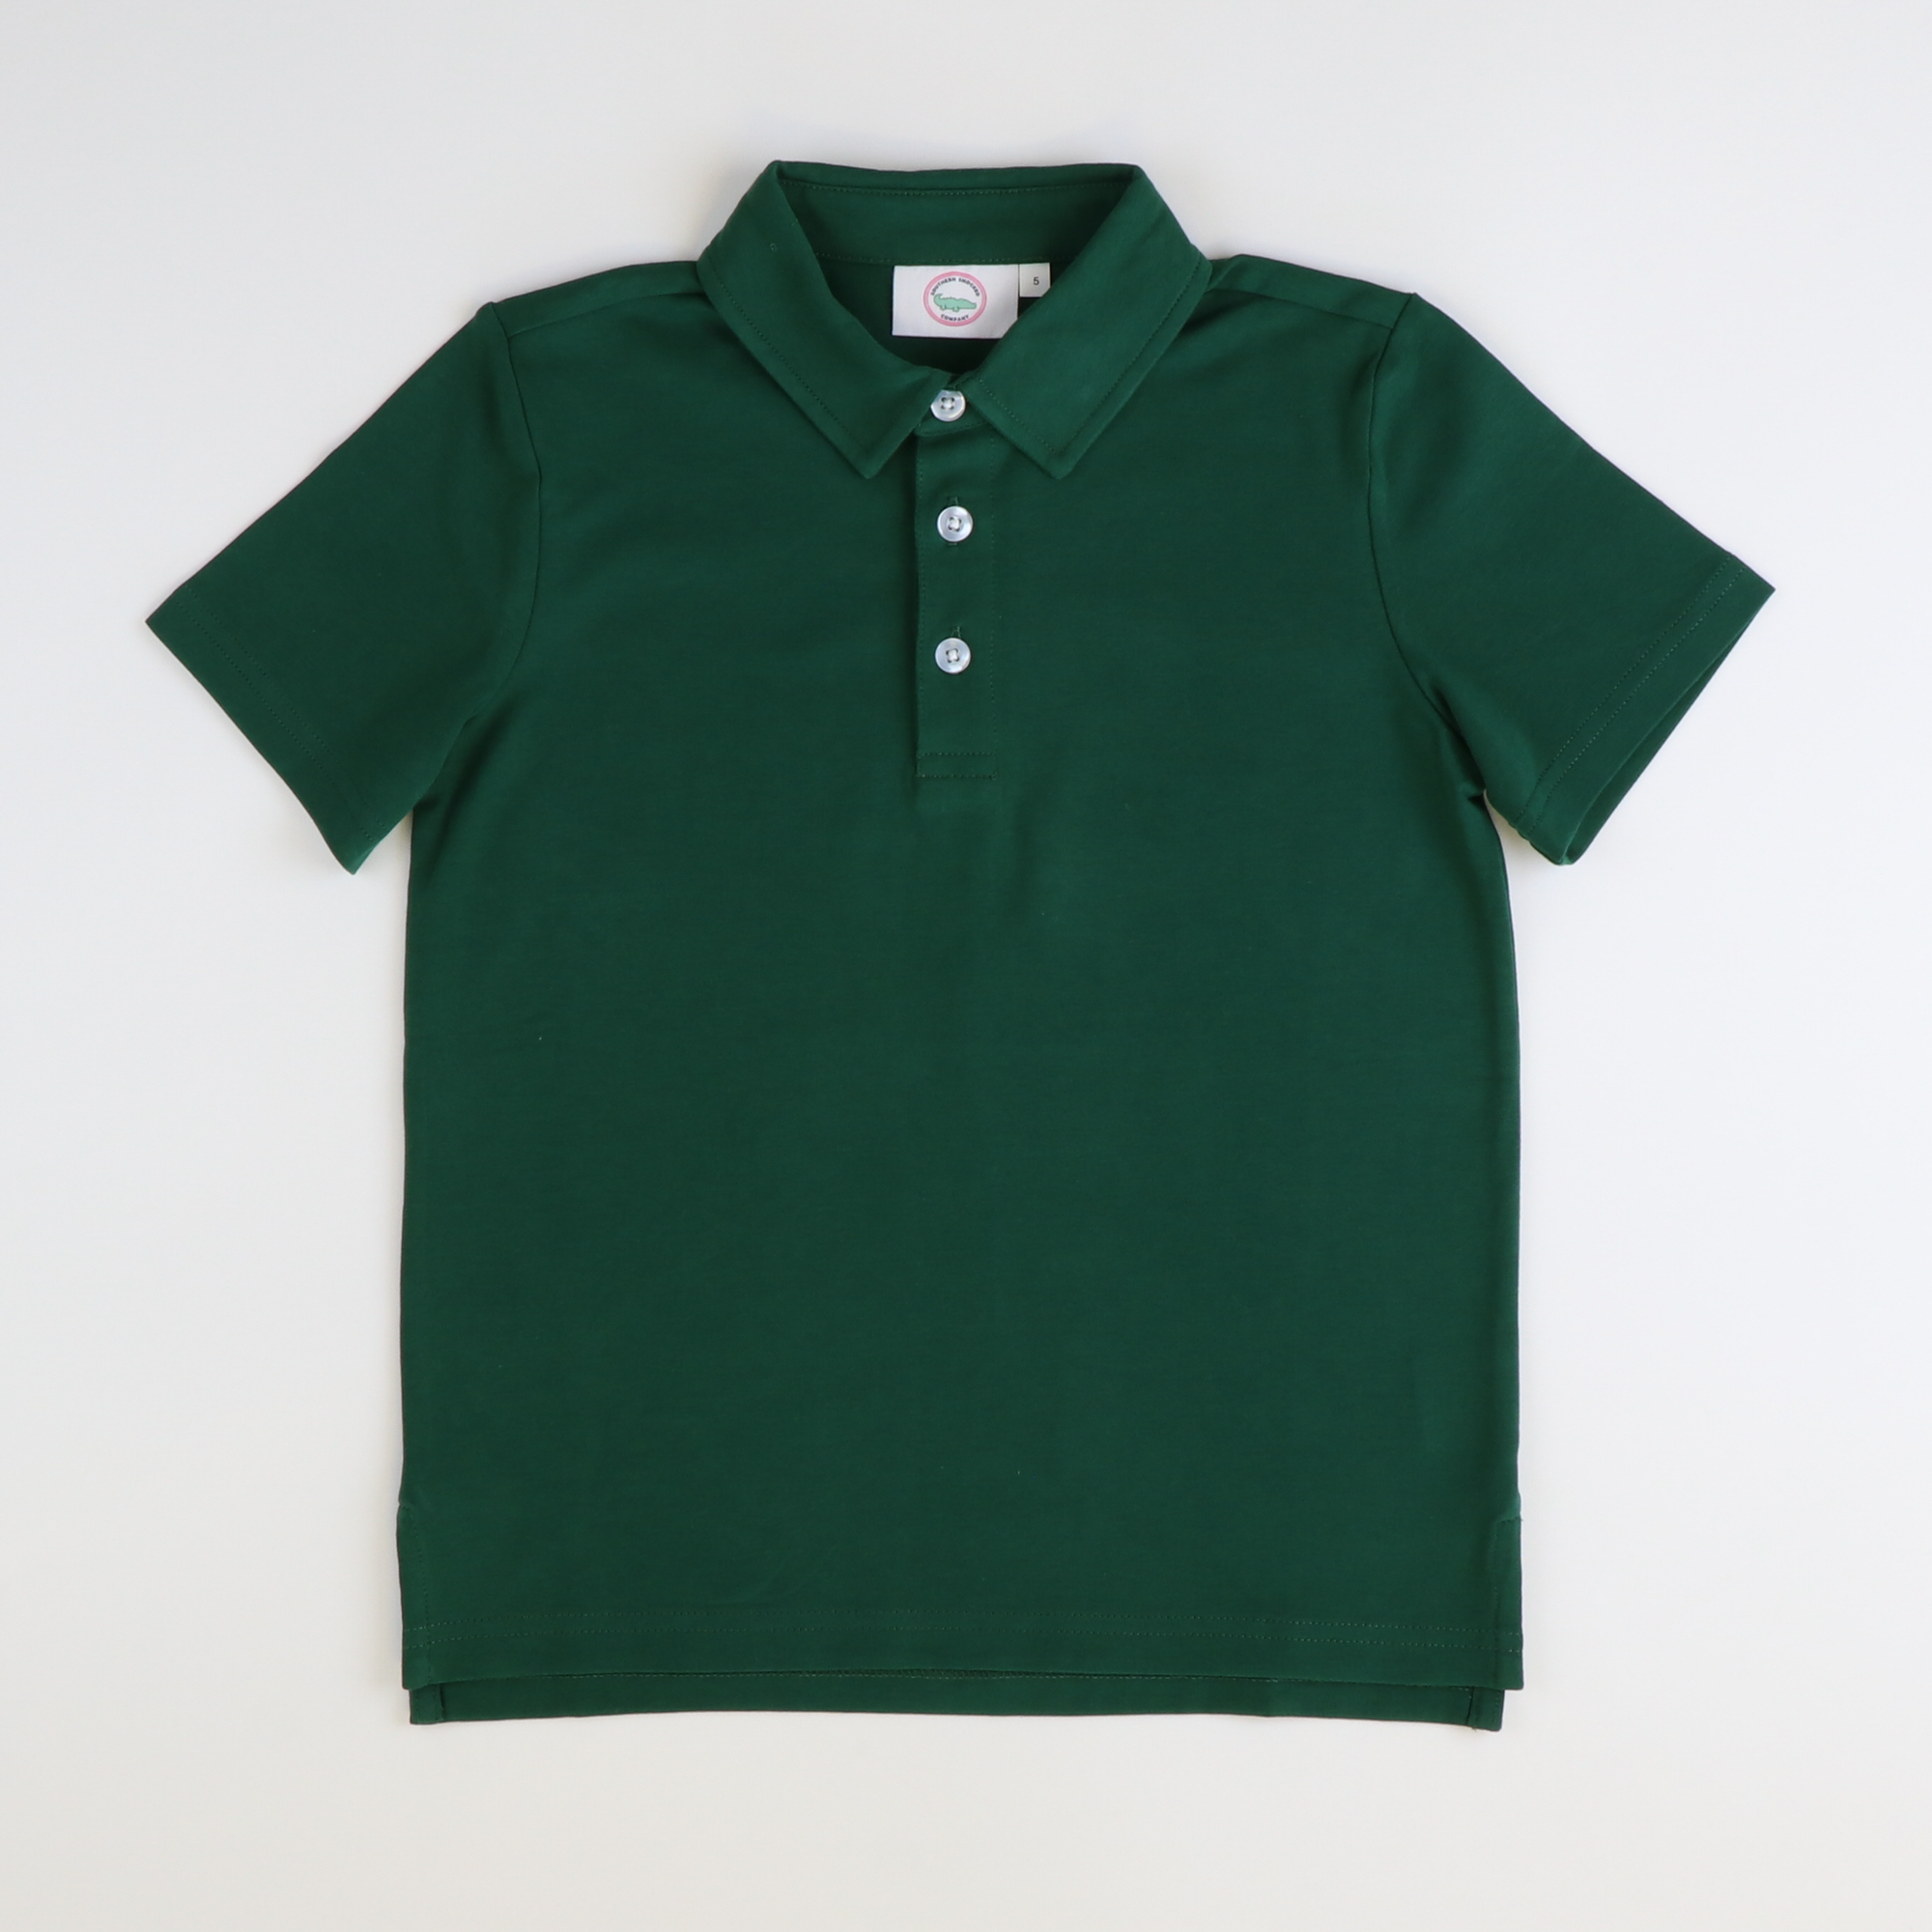 Boys Signature S/S Knit Polo - Hunter Green Solid